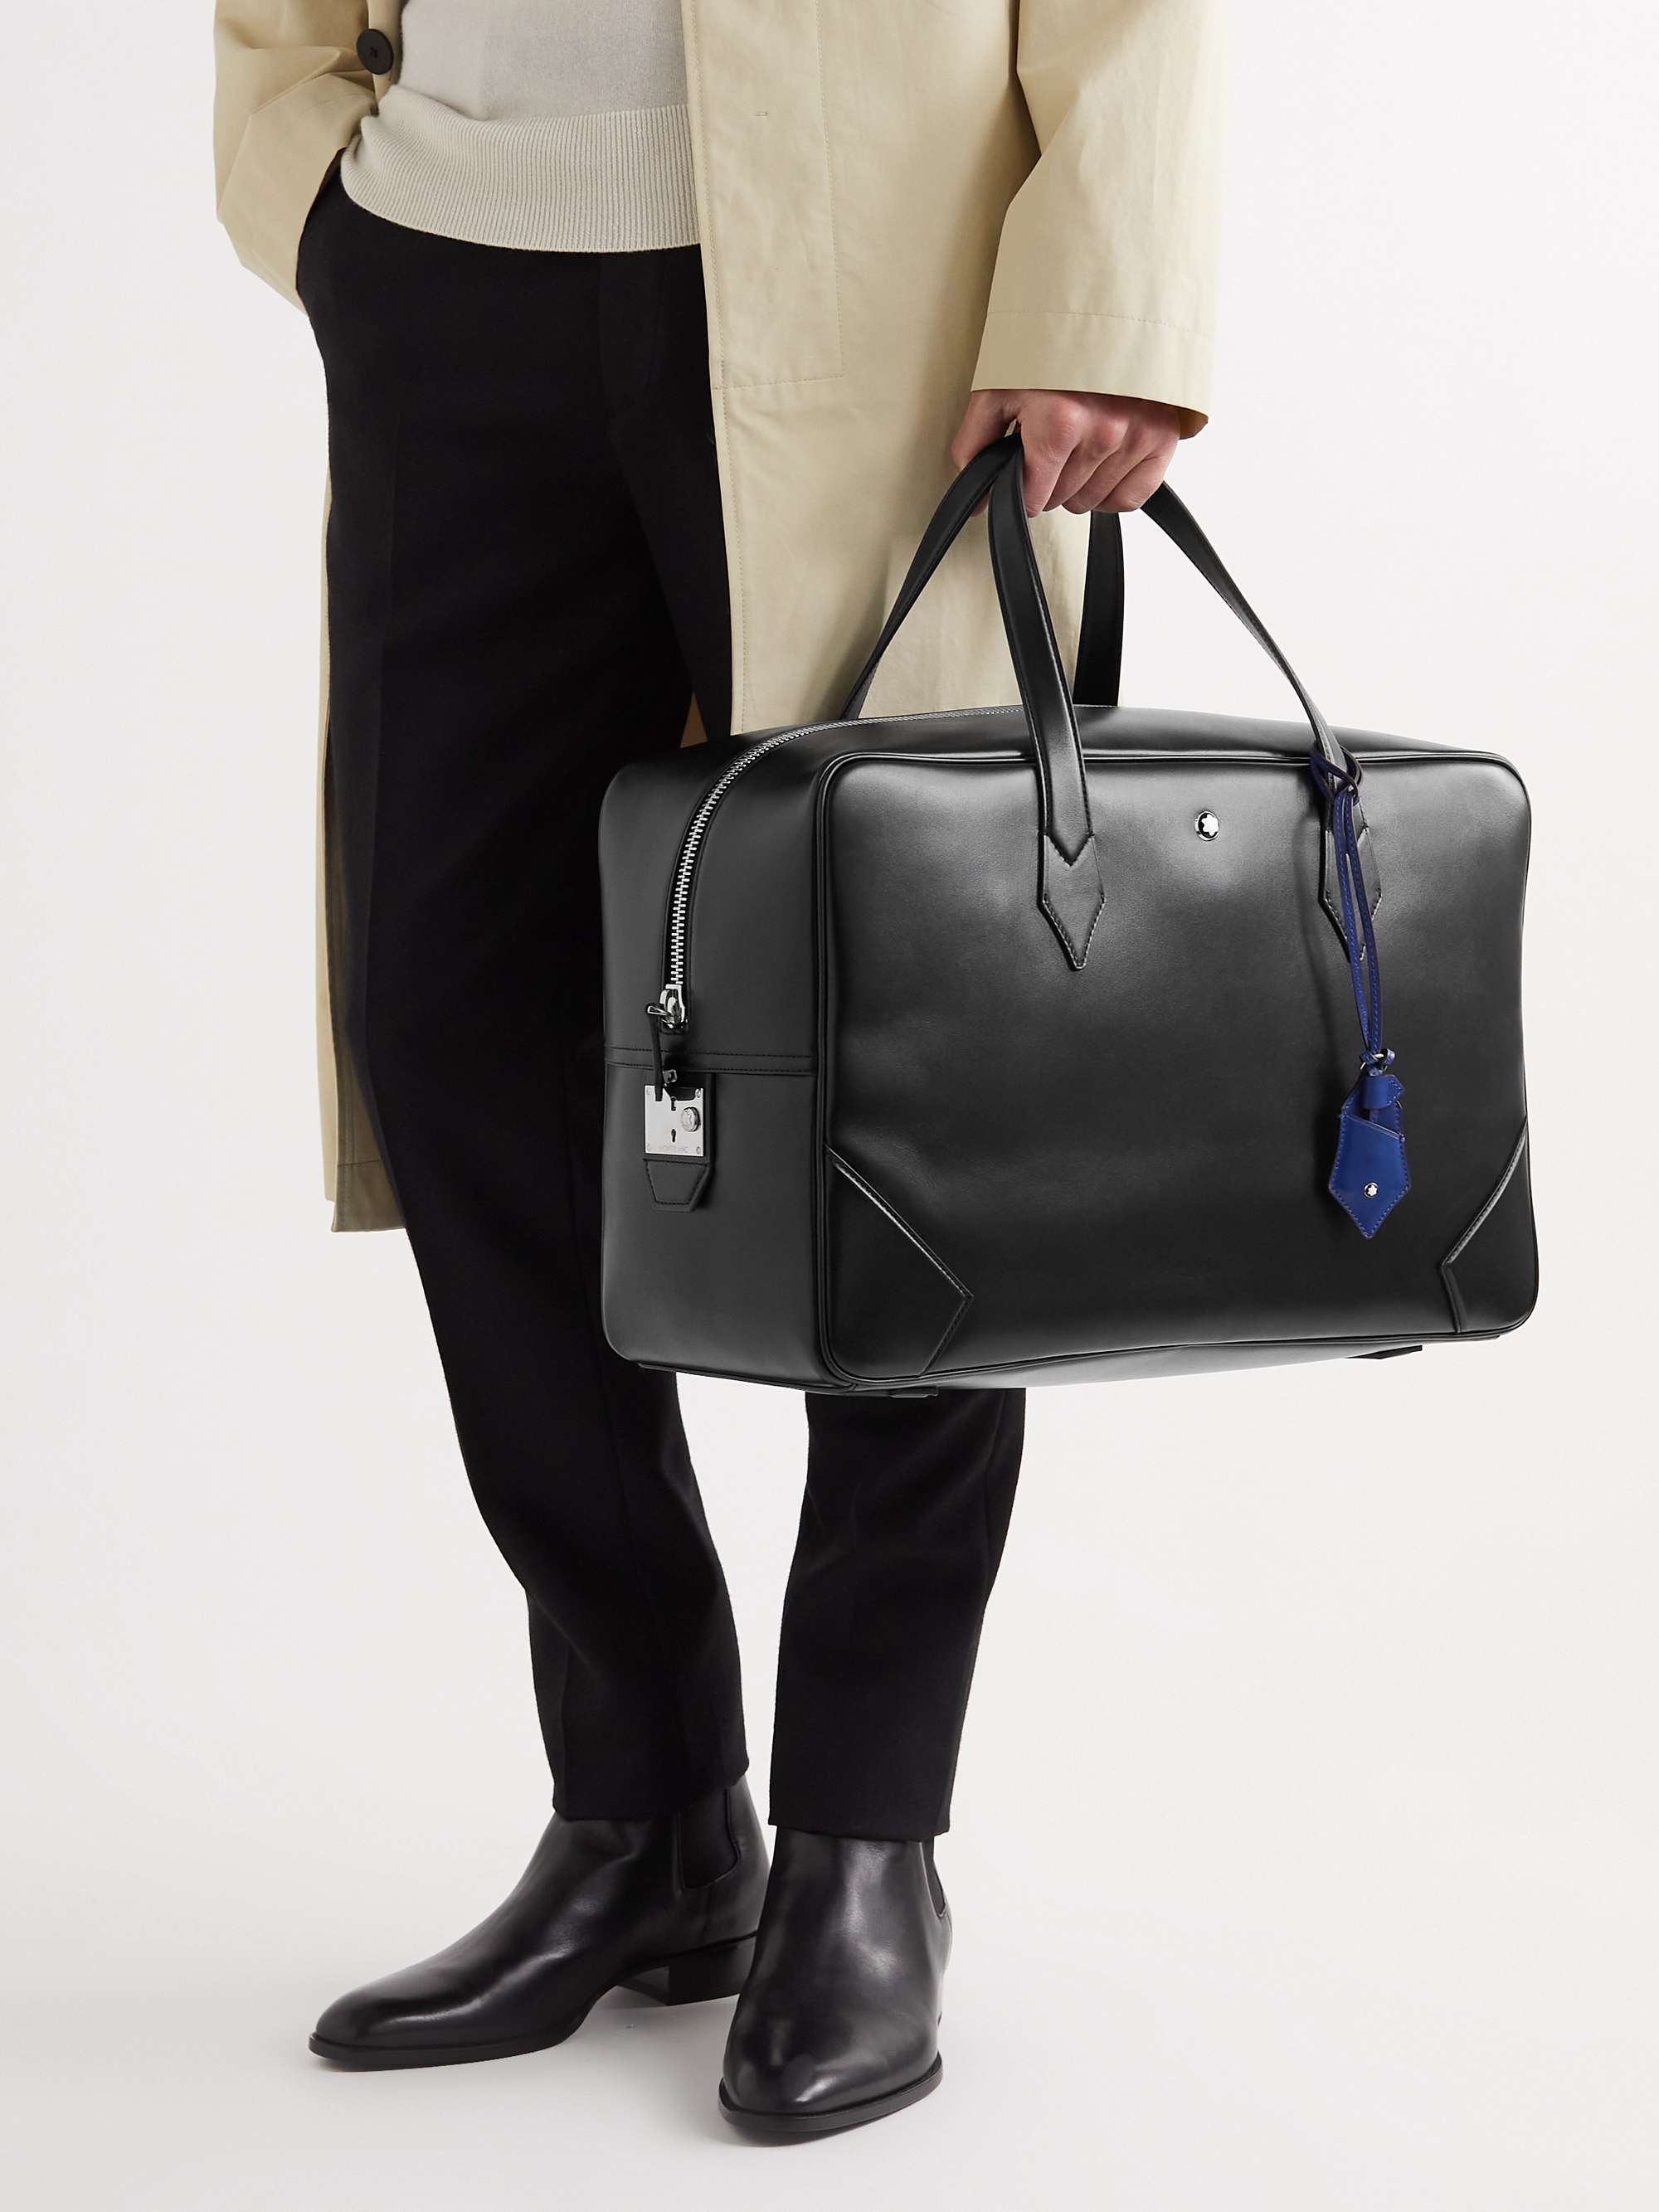 Mens Bags Gym bags and sports bags Montblanc Leather Meisterstück Duffle in Black for Men 